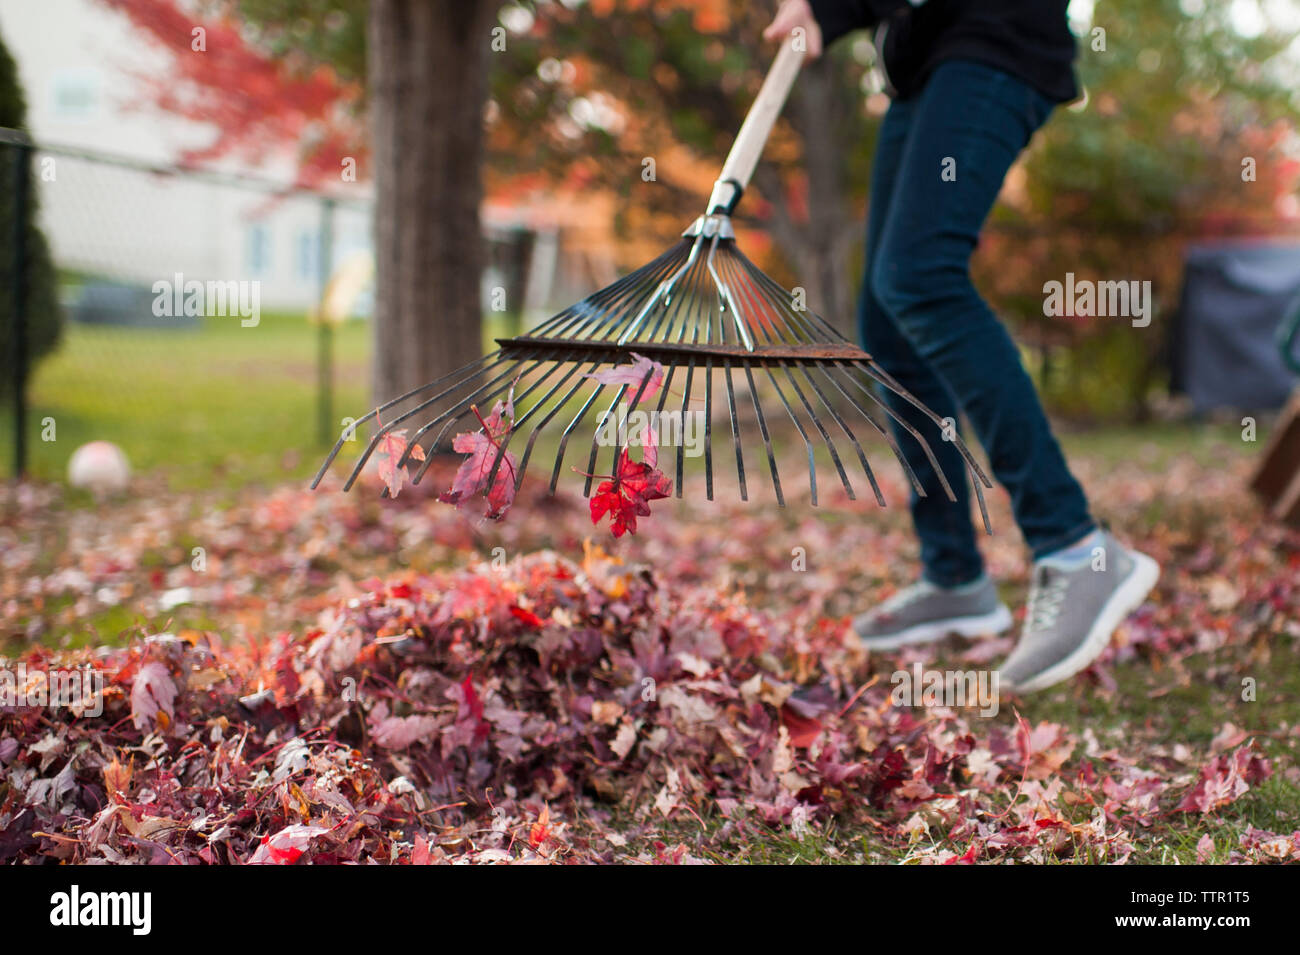 Pre teen girl doing chores raking up colorful autumn leaves Stock Photo